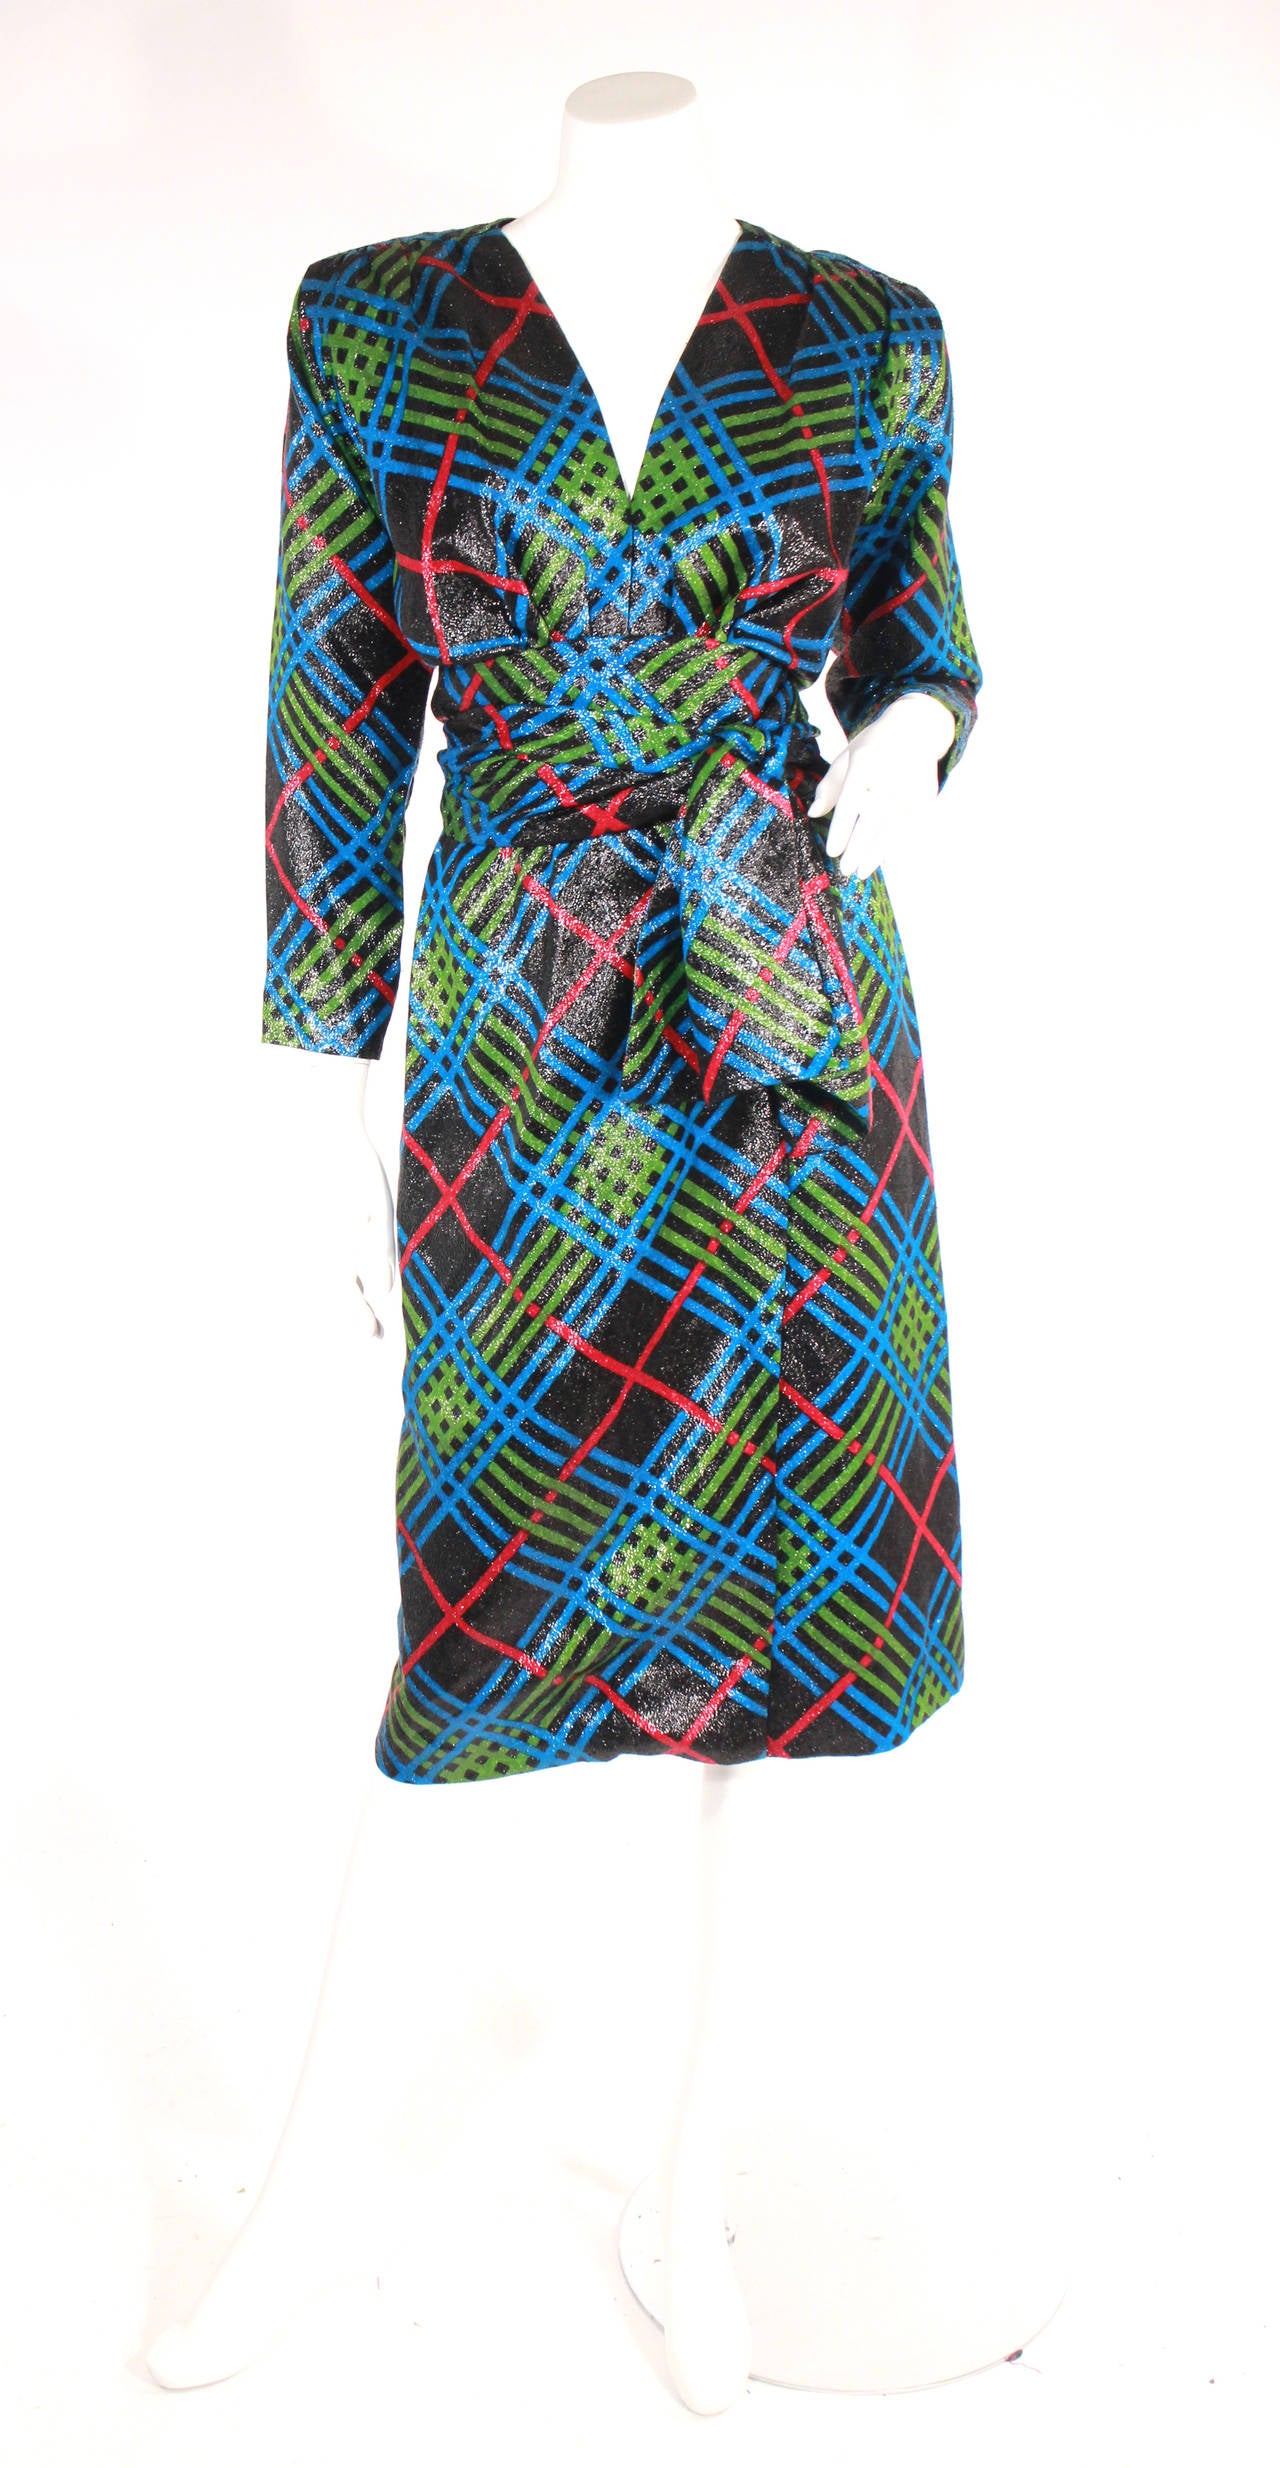 Vintage 1980's YSL wrap dress. Multi color- red, green, blue, fully lined, low neck, shoulder pads, metallic sheen. This dress is perfect for the holidays!!